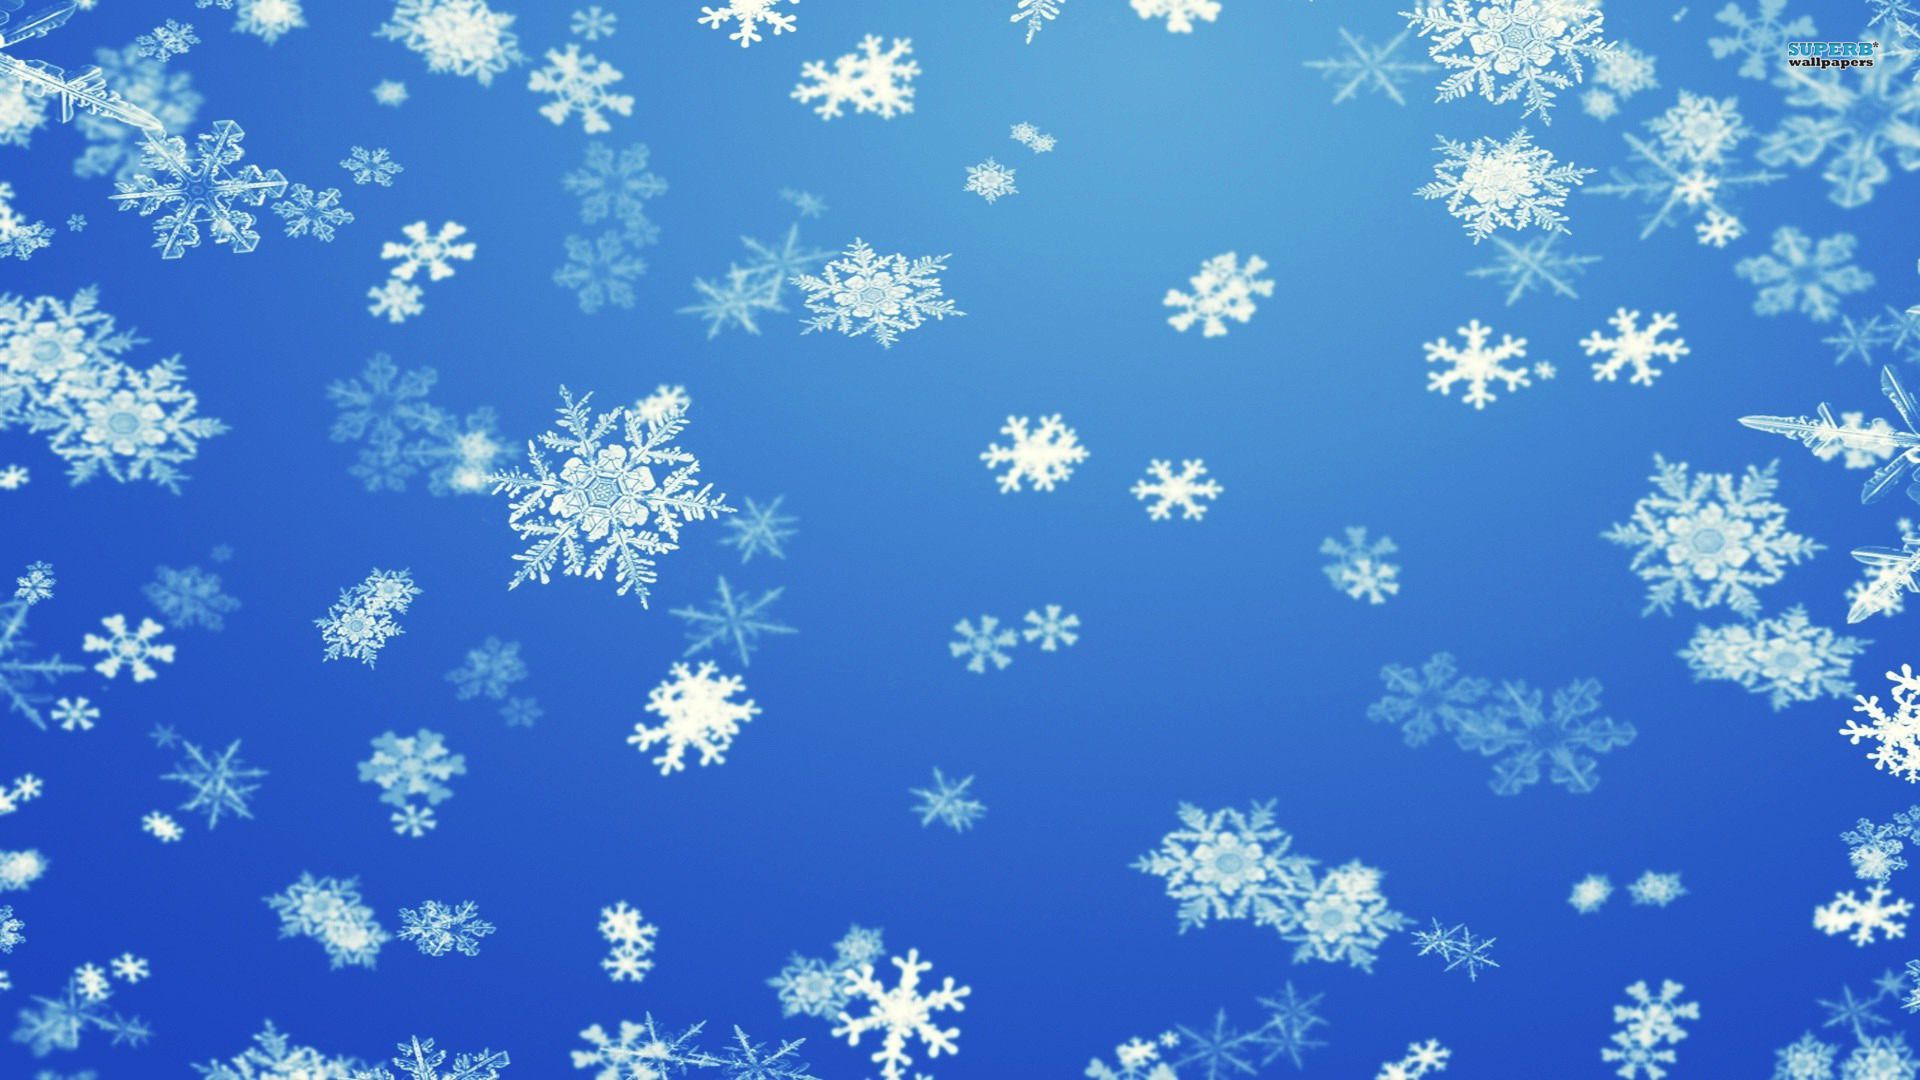 HD wallpaper, Snowflakes, Background